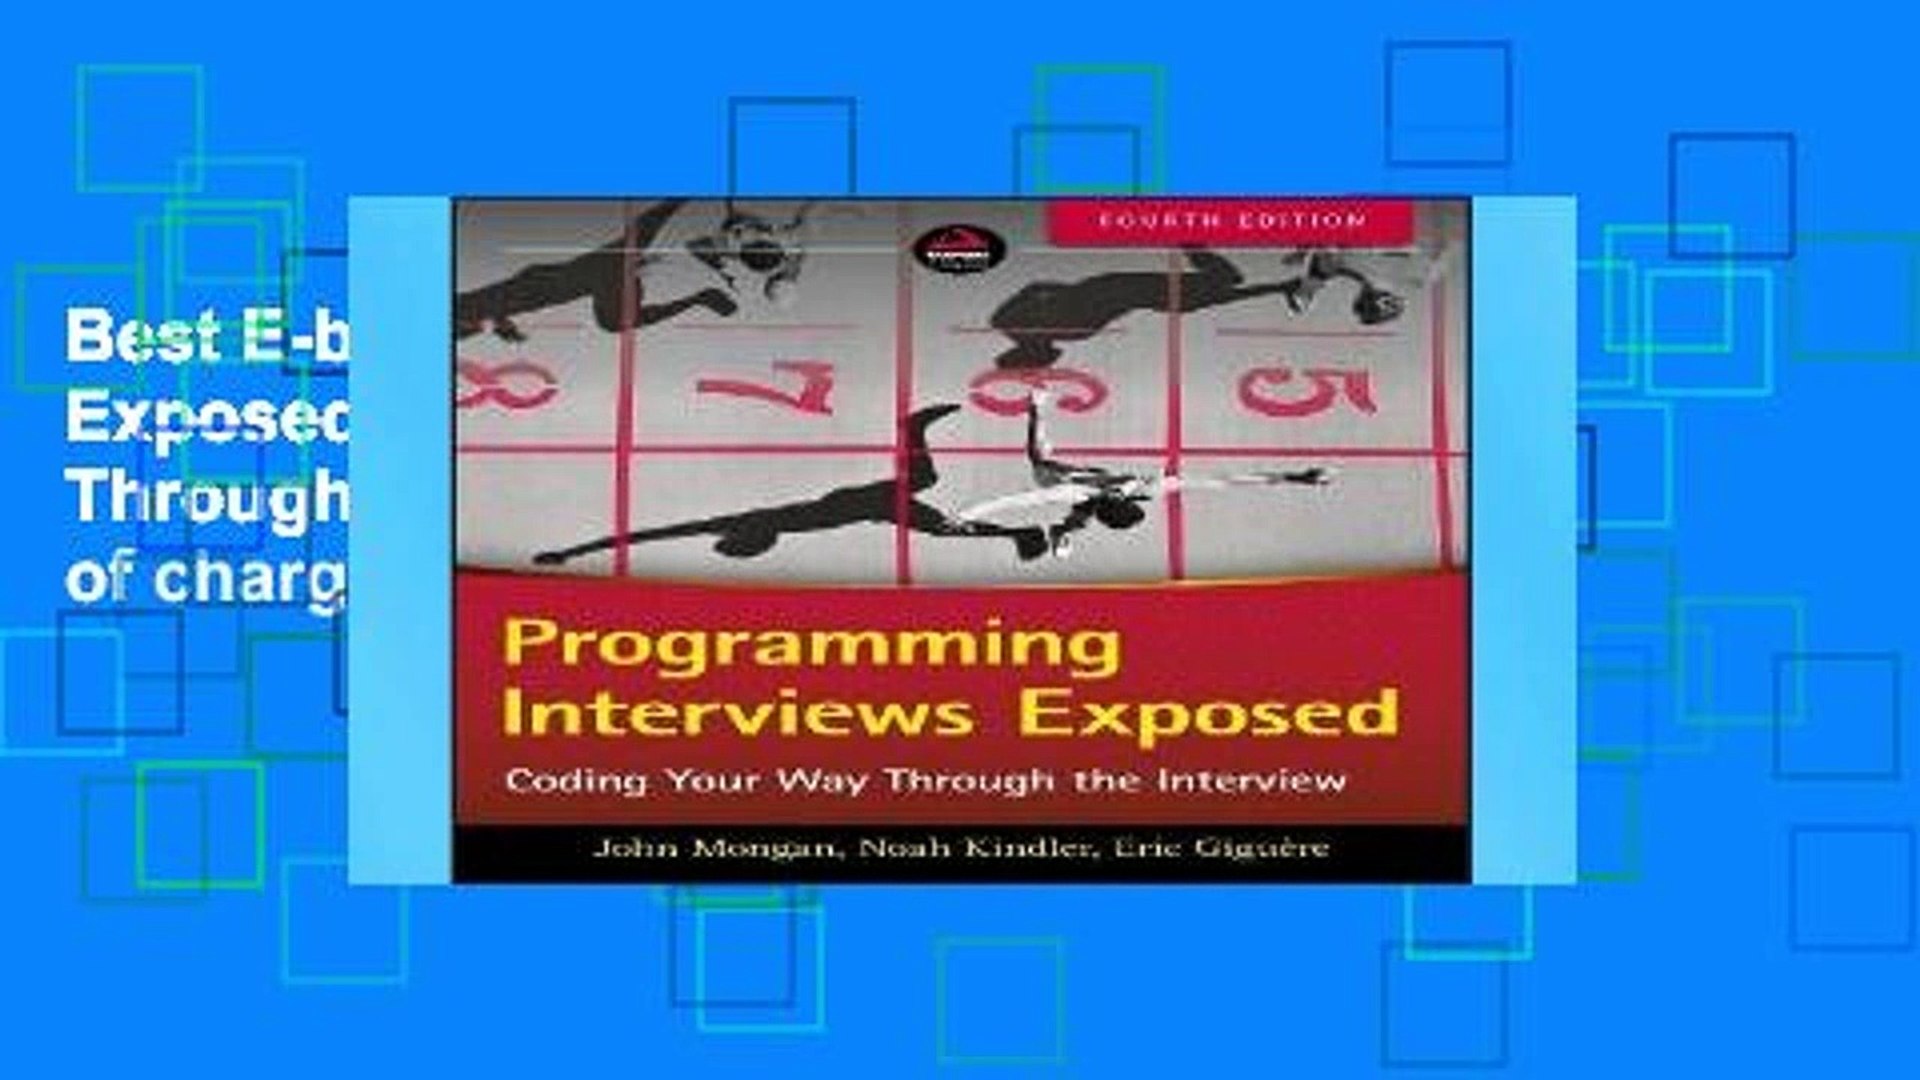 Best E-book Programming Interviews Exposed: Coding Your Way Through the Interview free of charge